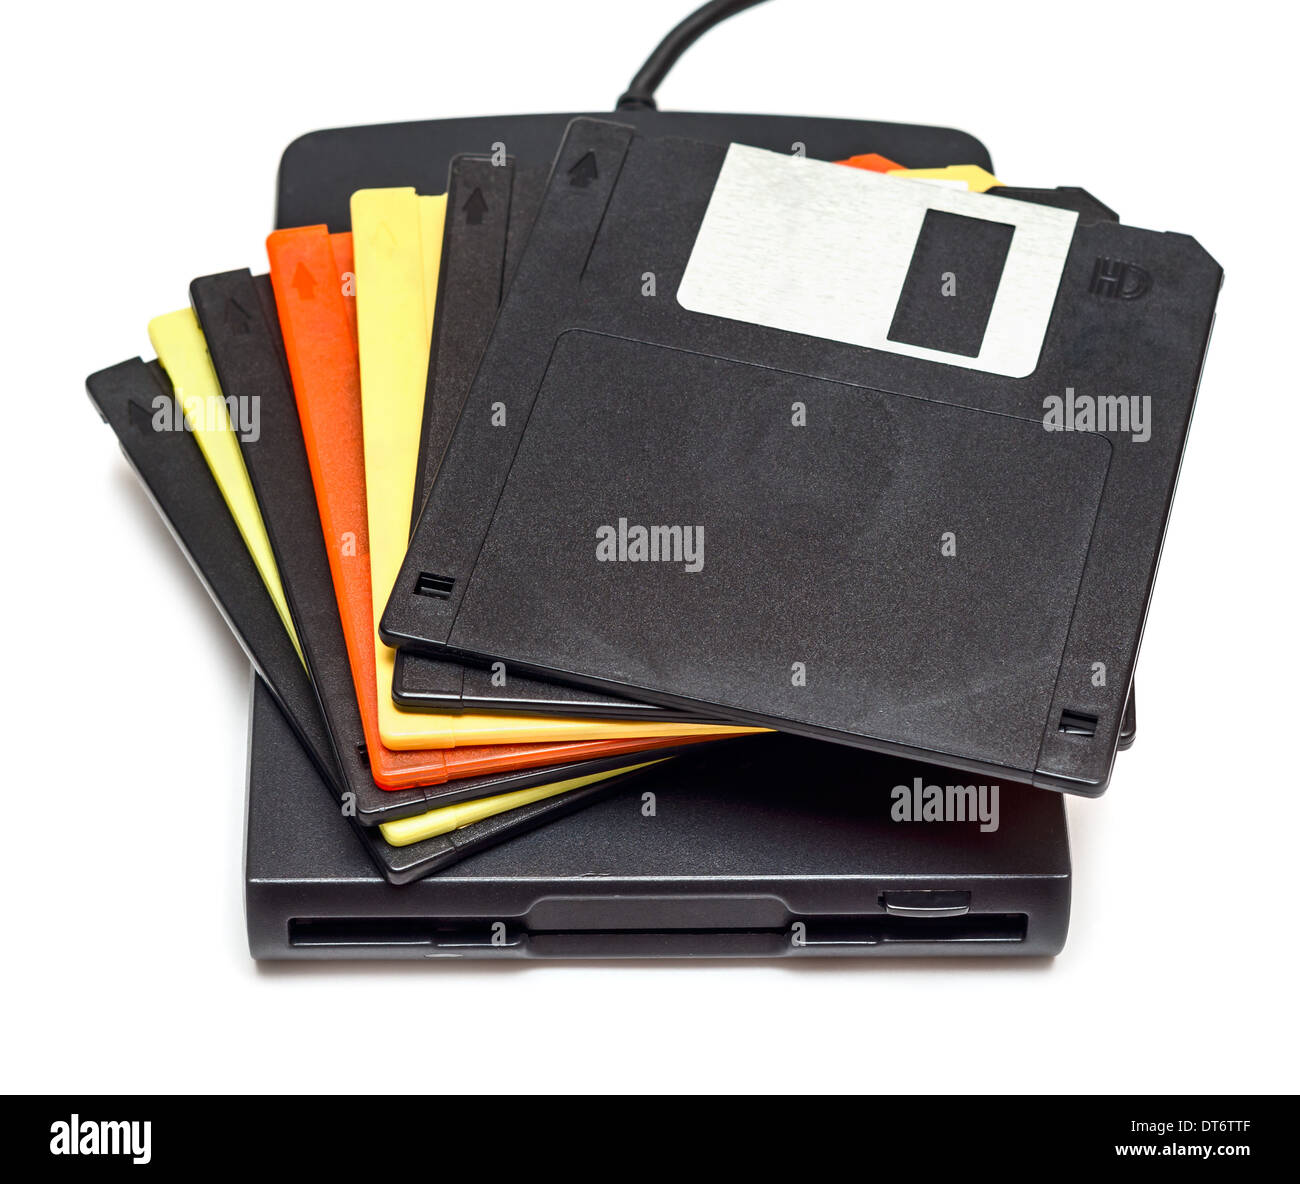 External usb floppy disk drive with disks isolated on white background Stock Photo